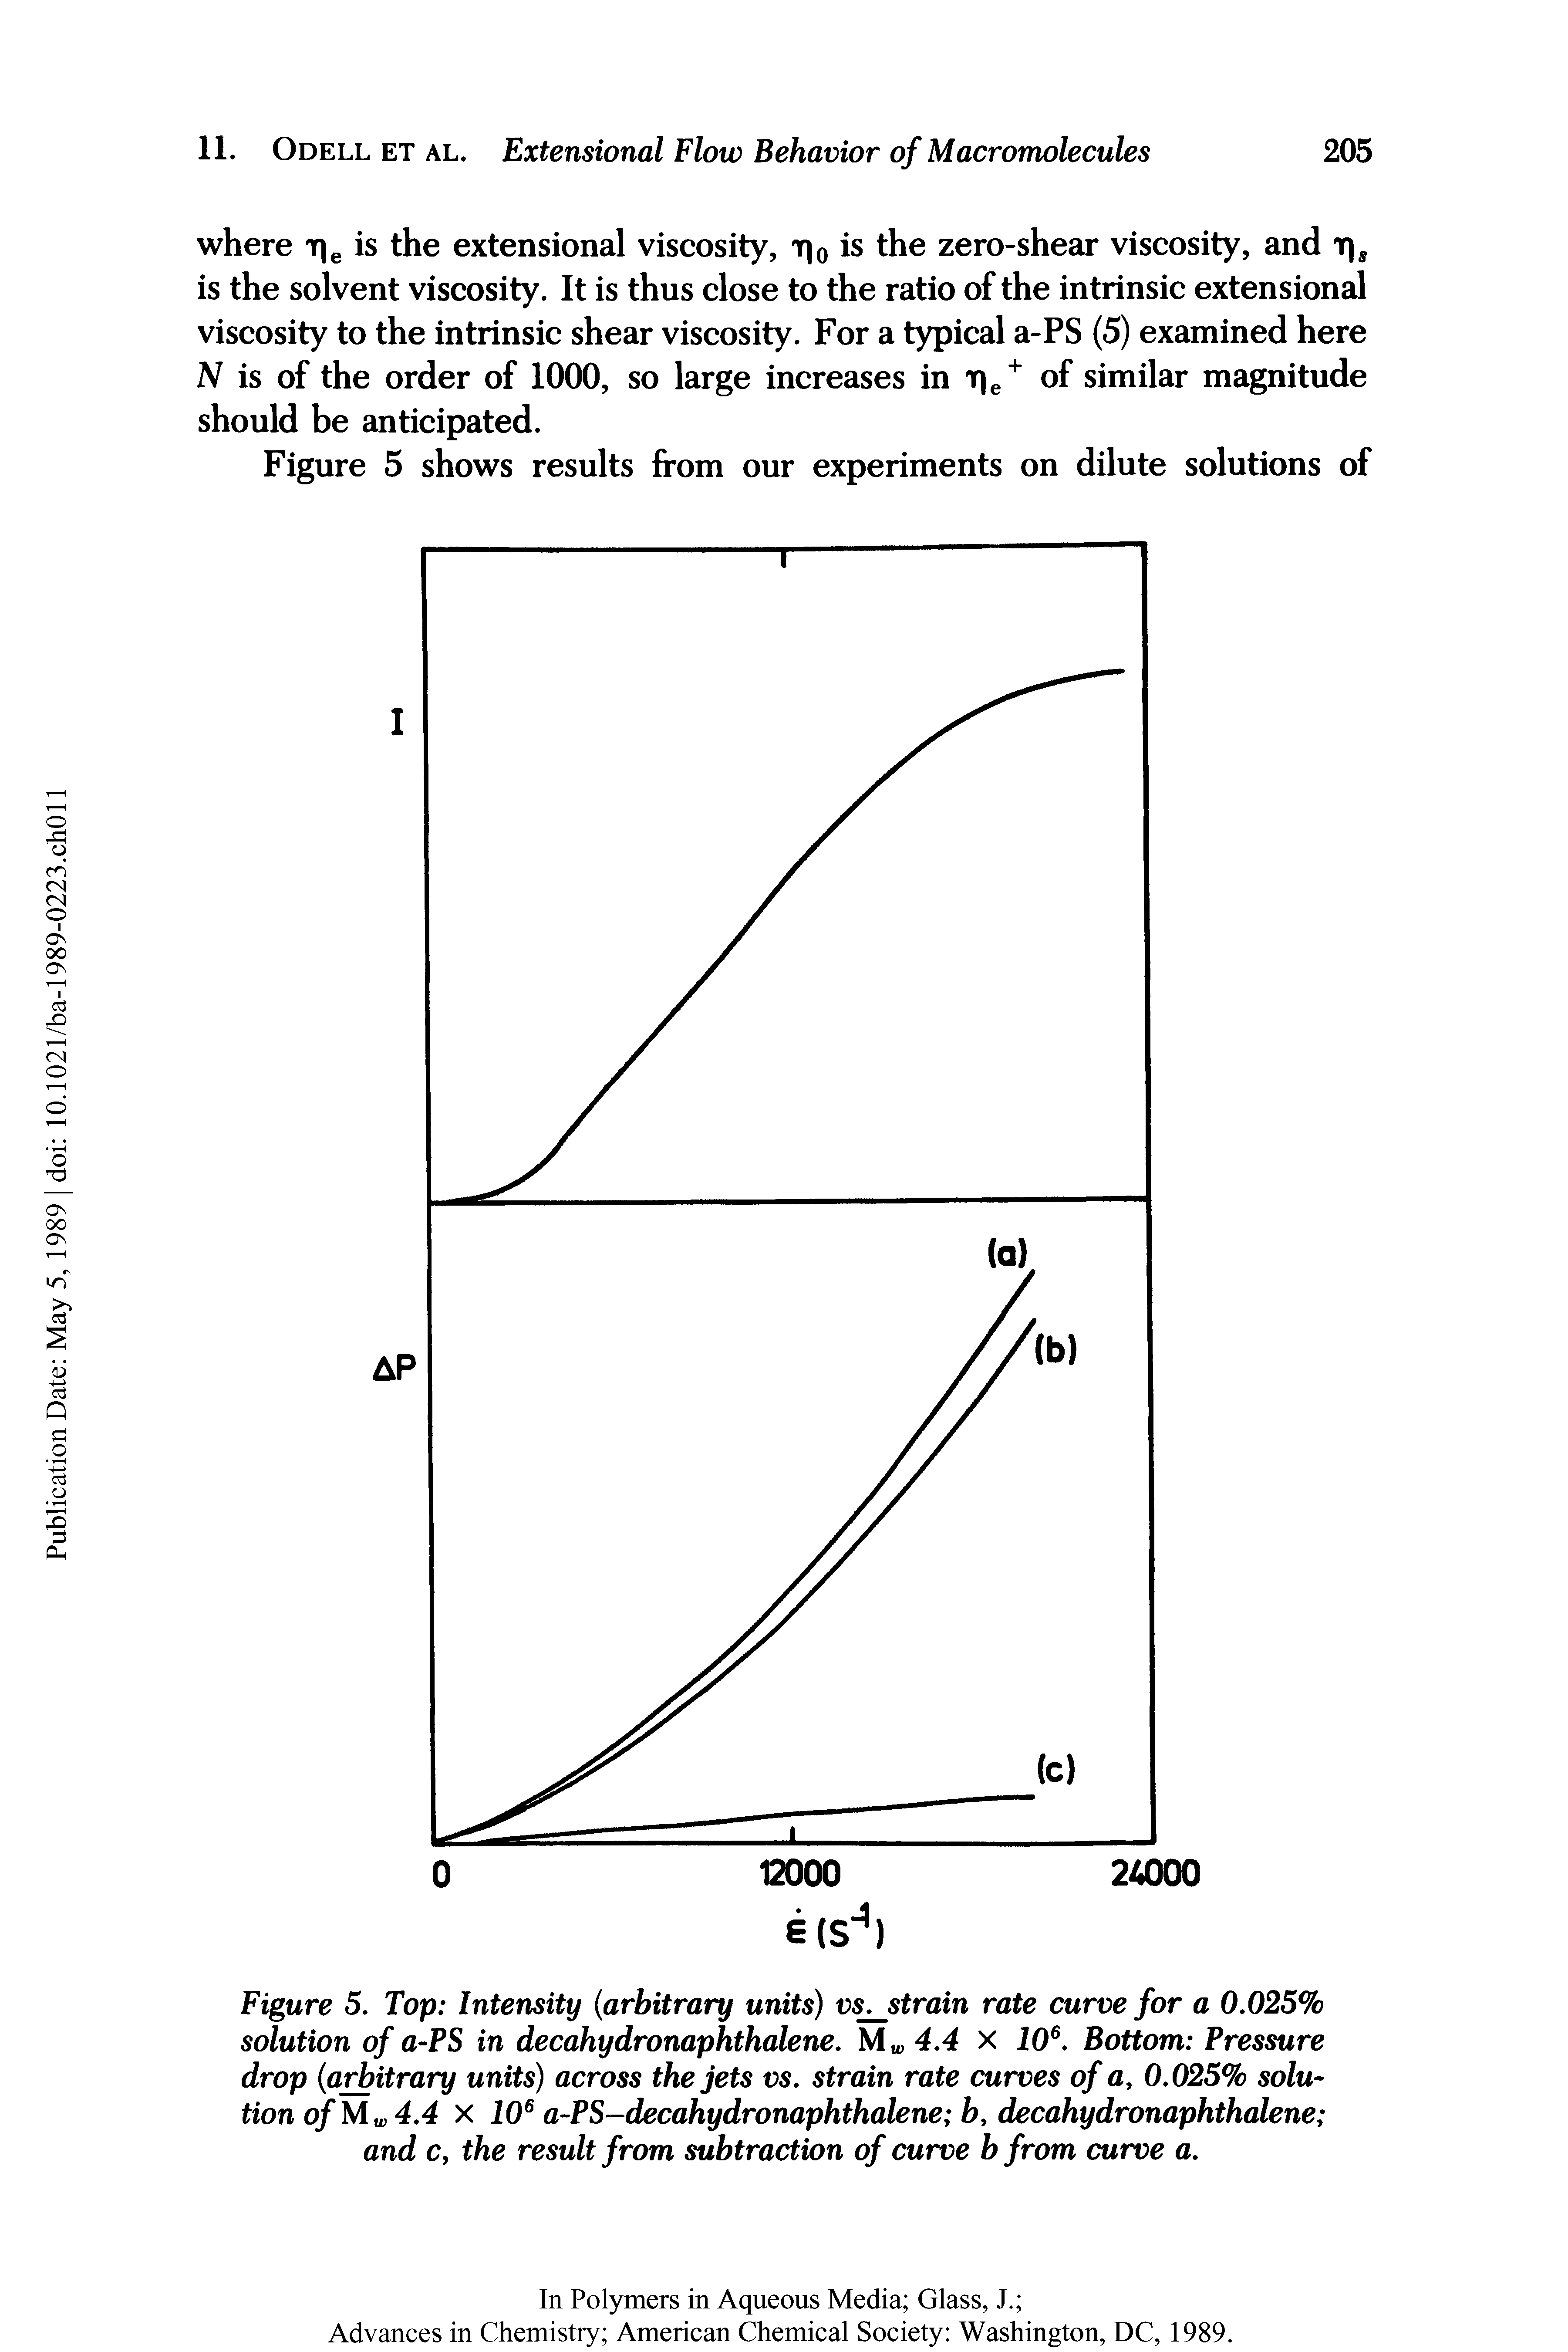 Figure 5. Top Intensity arbitrary units) vSj strain rate curve for a 0.025% solution of a-PS in decahydronaphthalene. 4.4 X JO . Bottom Pressure drop arbitrary units) across the Jets vs. strain rate curves of a, 0.025% solution of Mw 4.4 X 10 a-PS-decahydronaphthalene b, decahydronaphthalene and c, the result from subtraction of curve b from curve a.